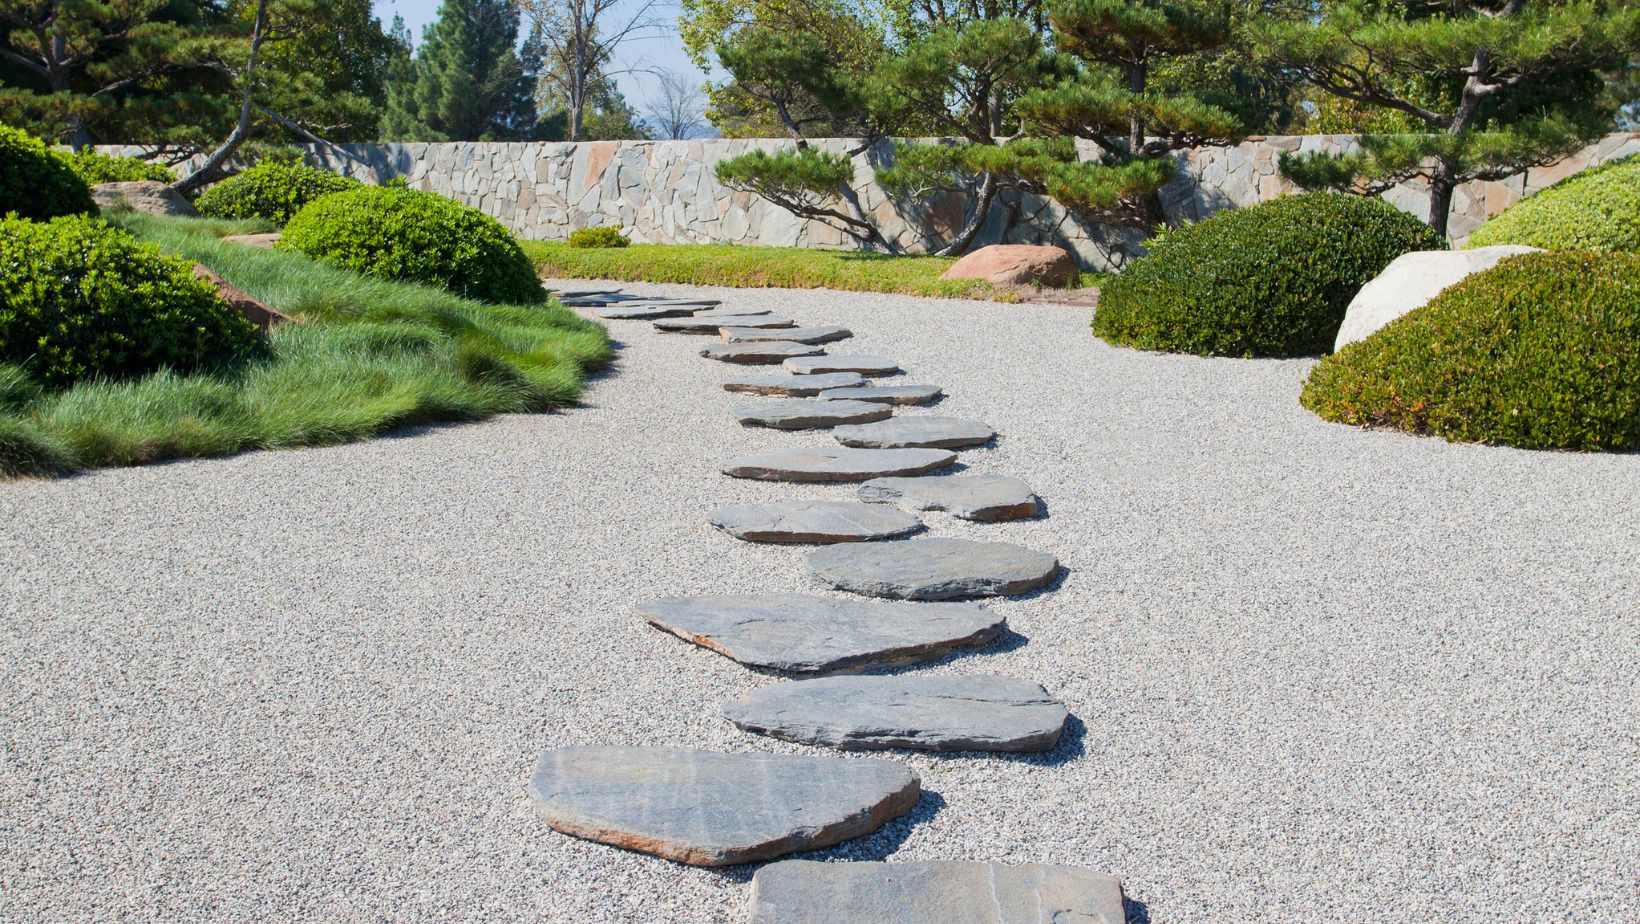 Stone and pebble pathway with garden